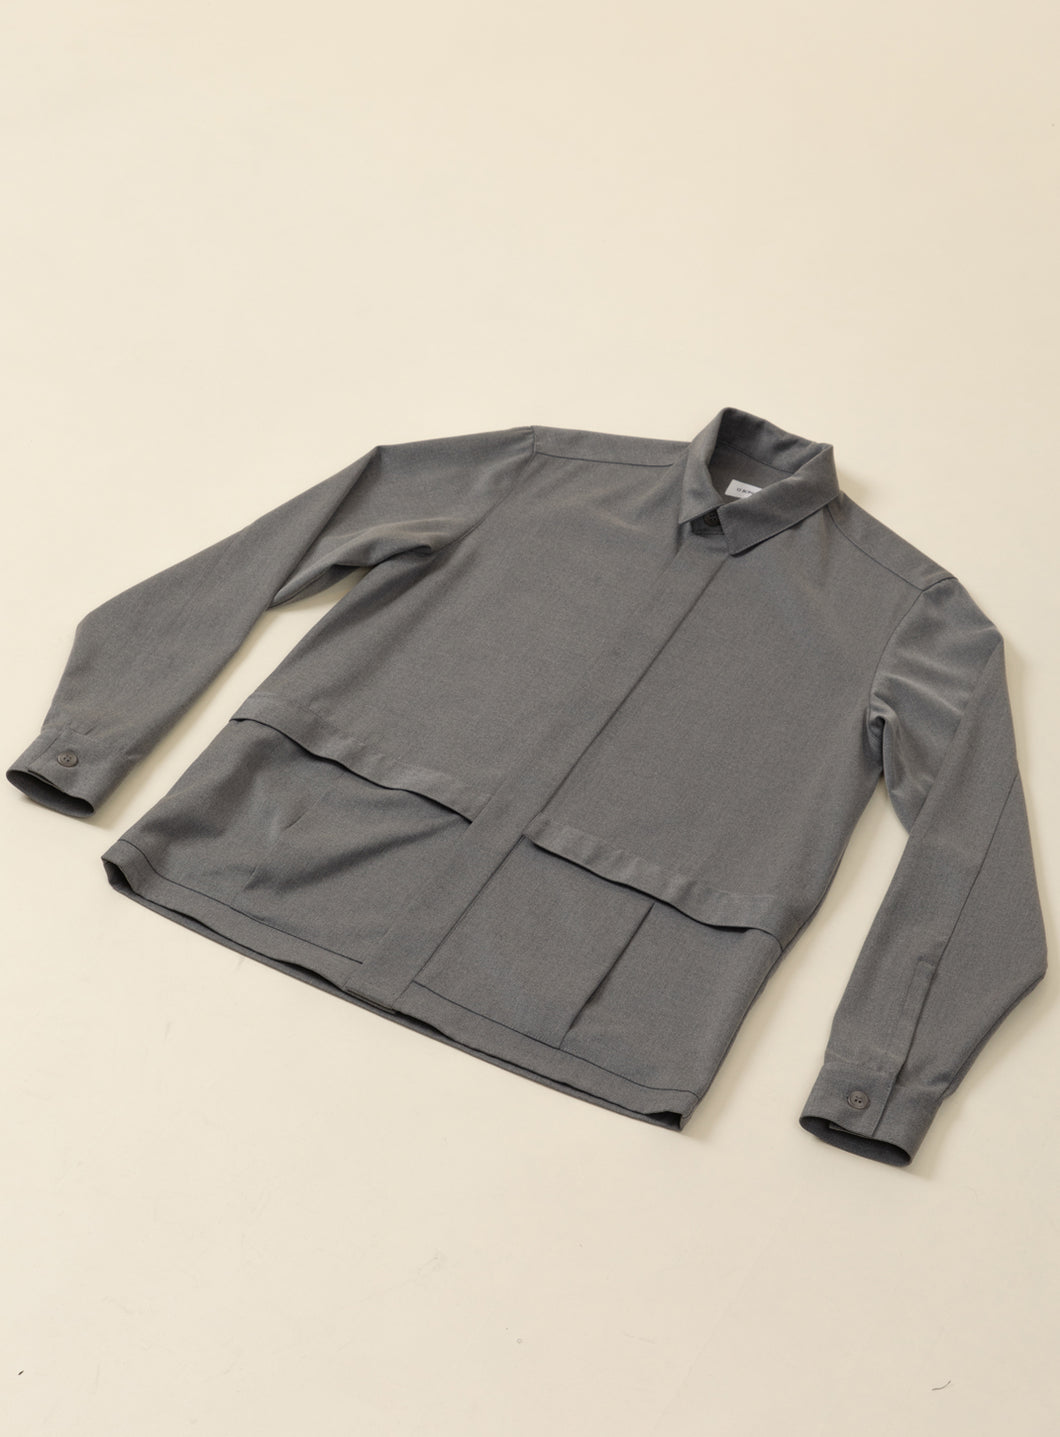 Overshirt with Flap Pockets in Heather Grey Serge Fabric